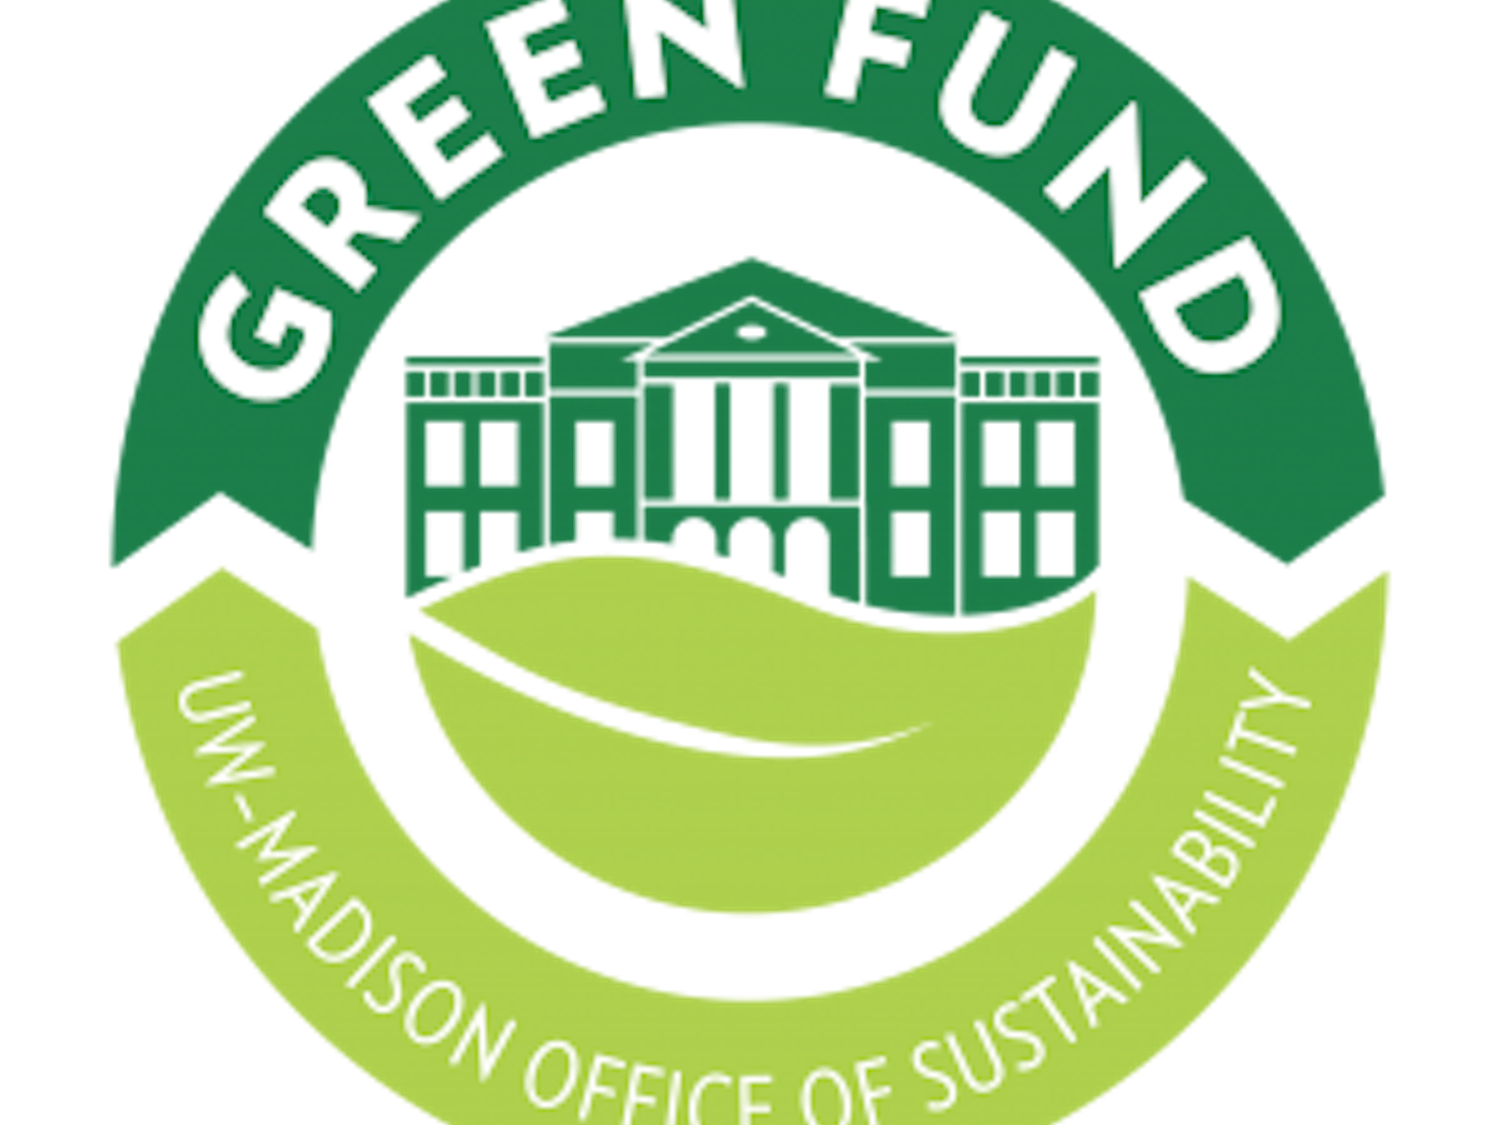 green-fund-logo-final-color-300x298.png